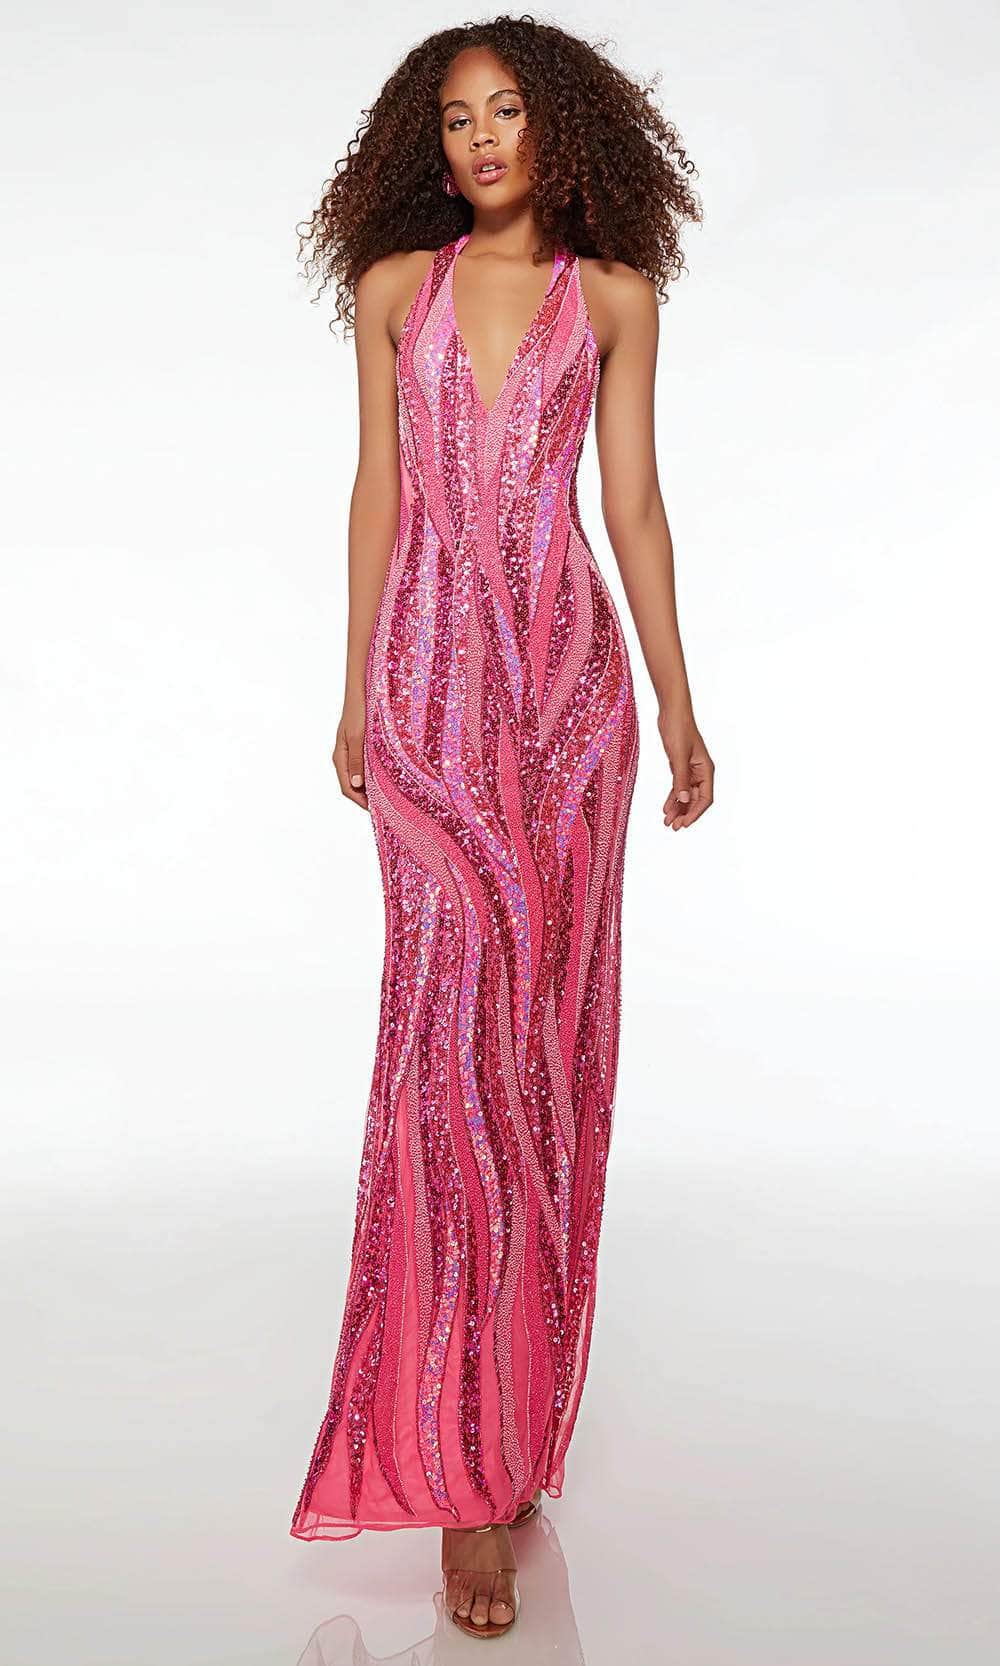 Image of Alyce Paris 61511 - Beaded Plunging Halter Prom Gown